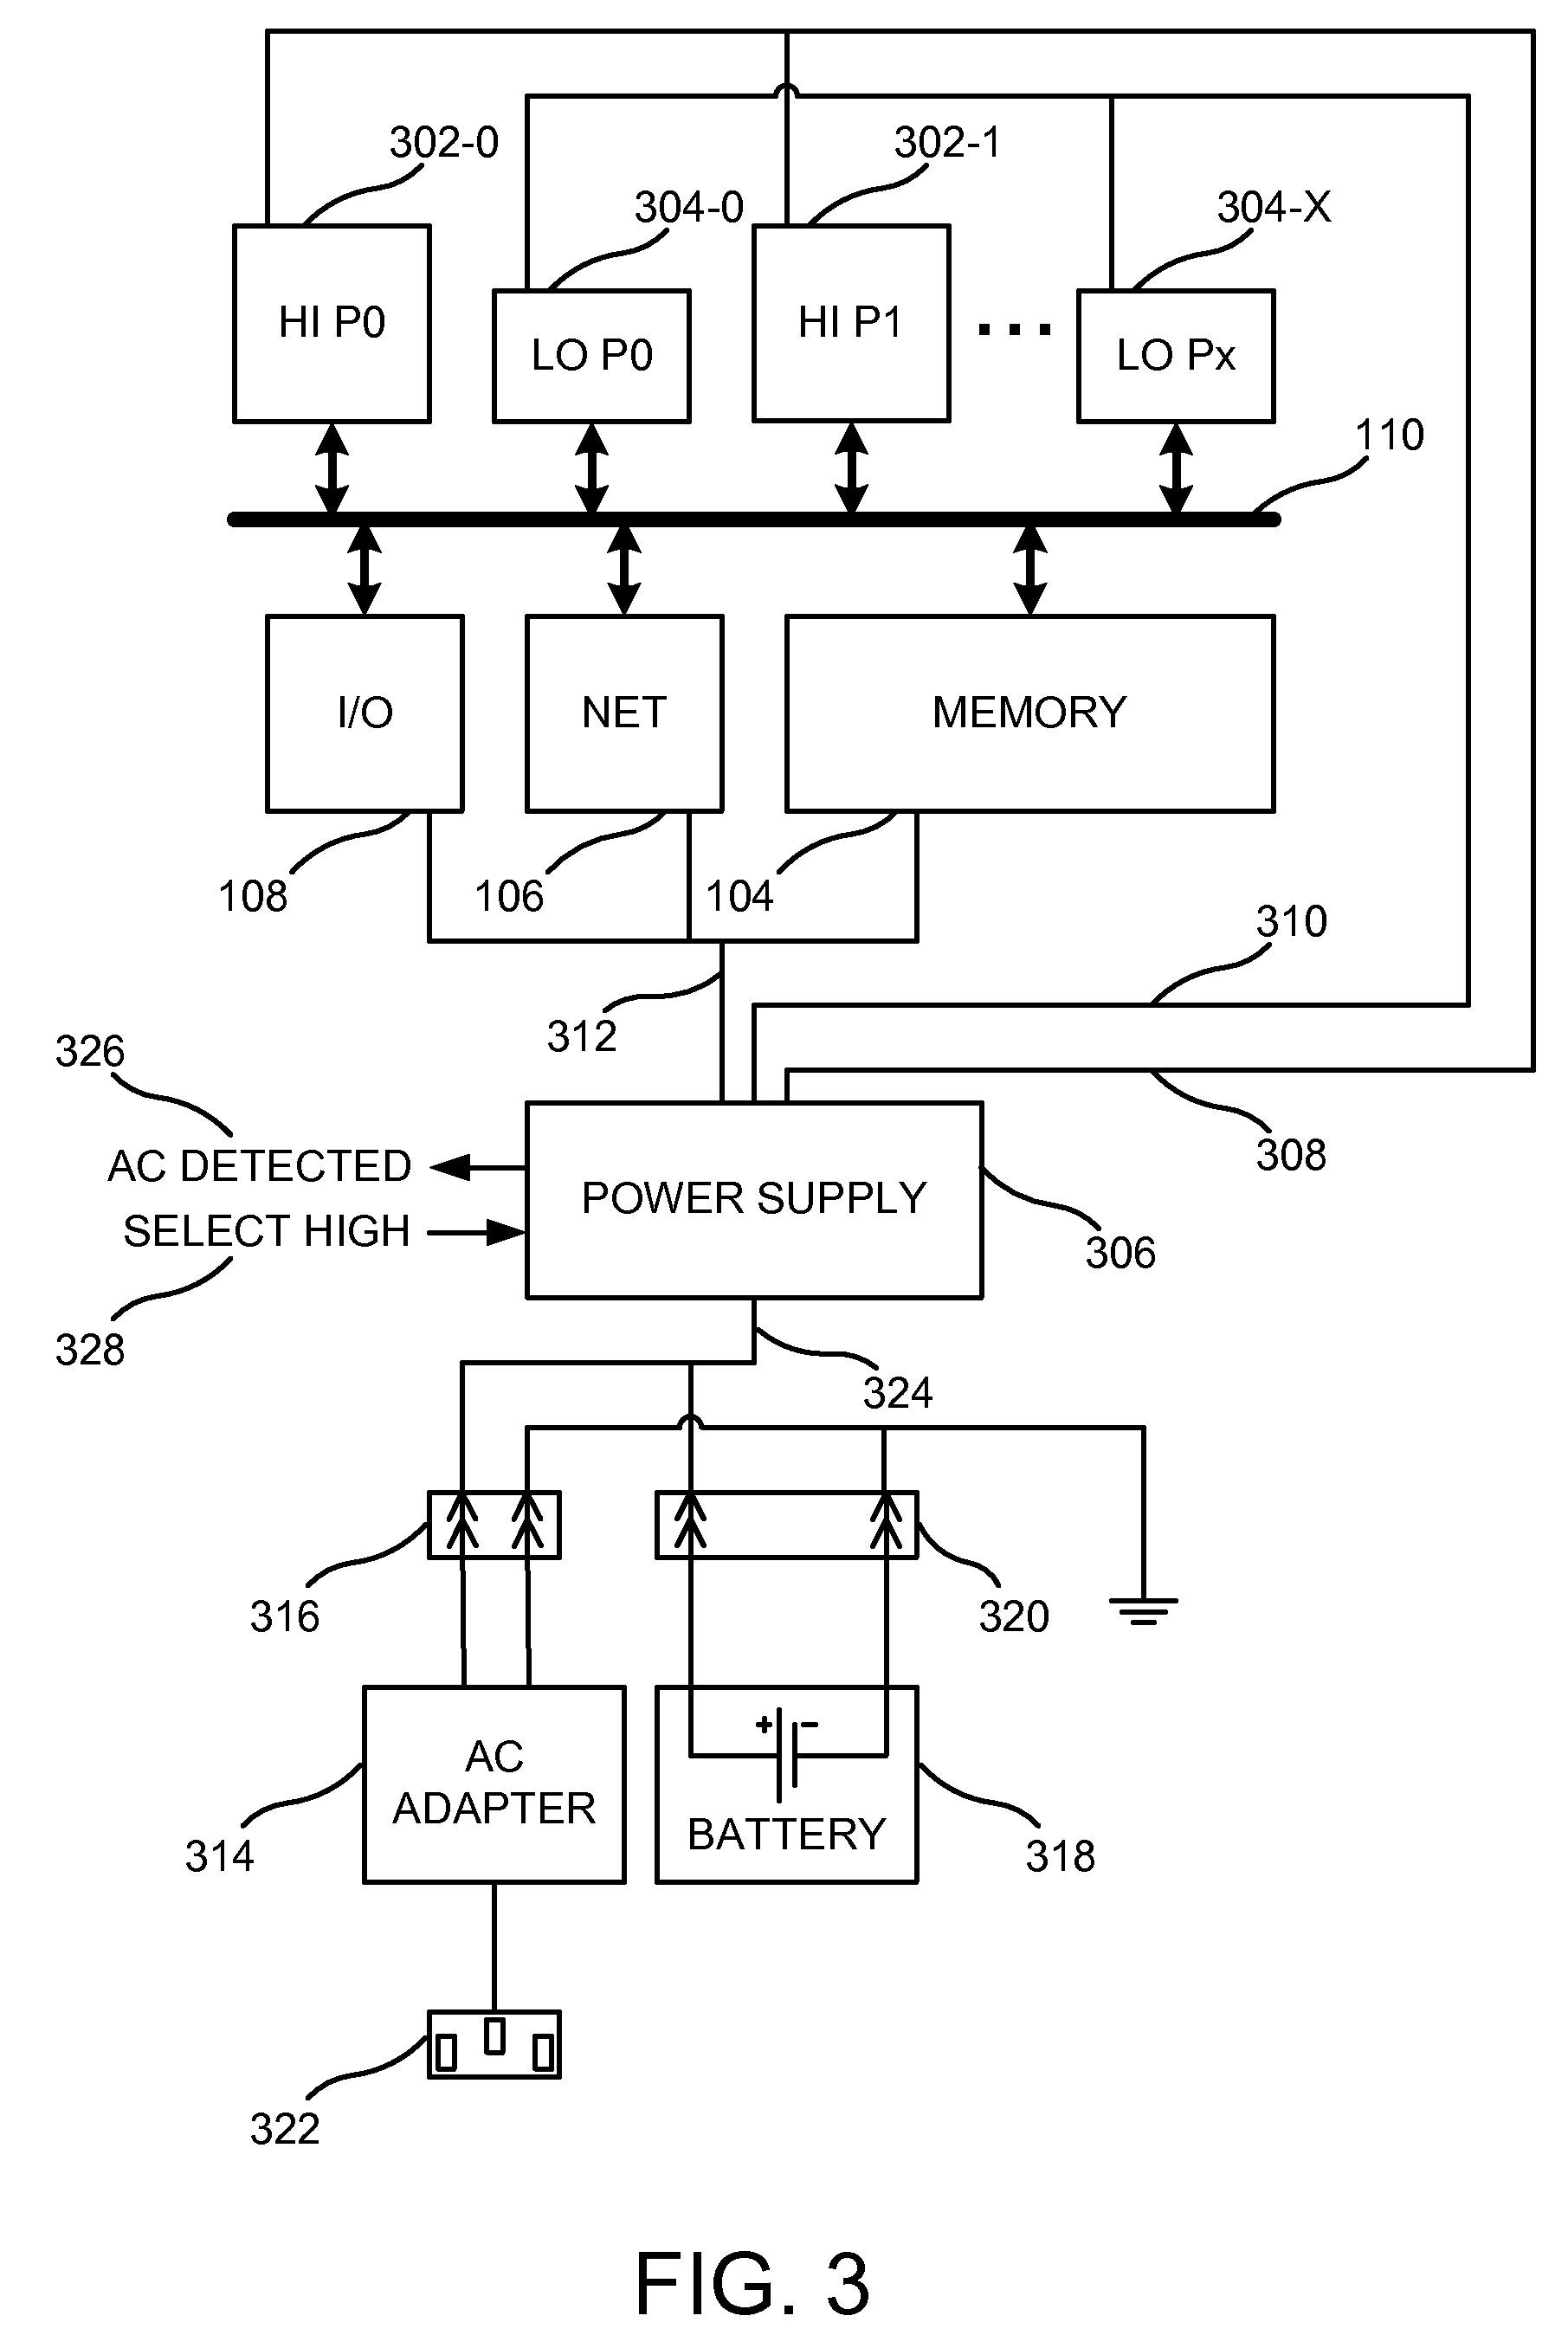 Apparatus, System, and Method for Power Management Utilizing Multiple Processor Types